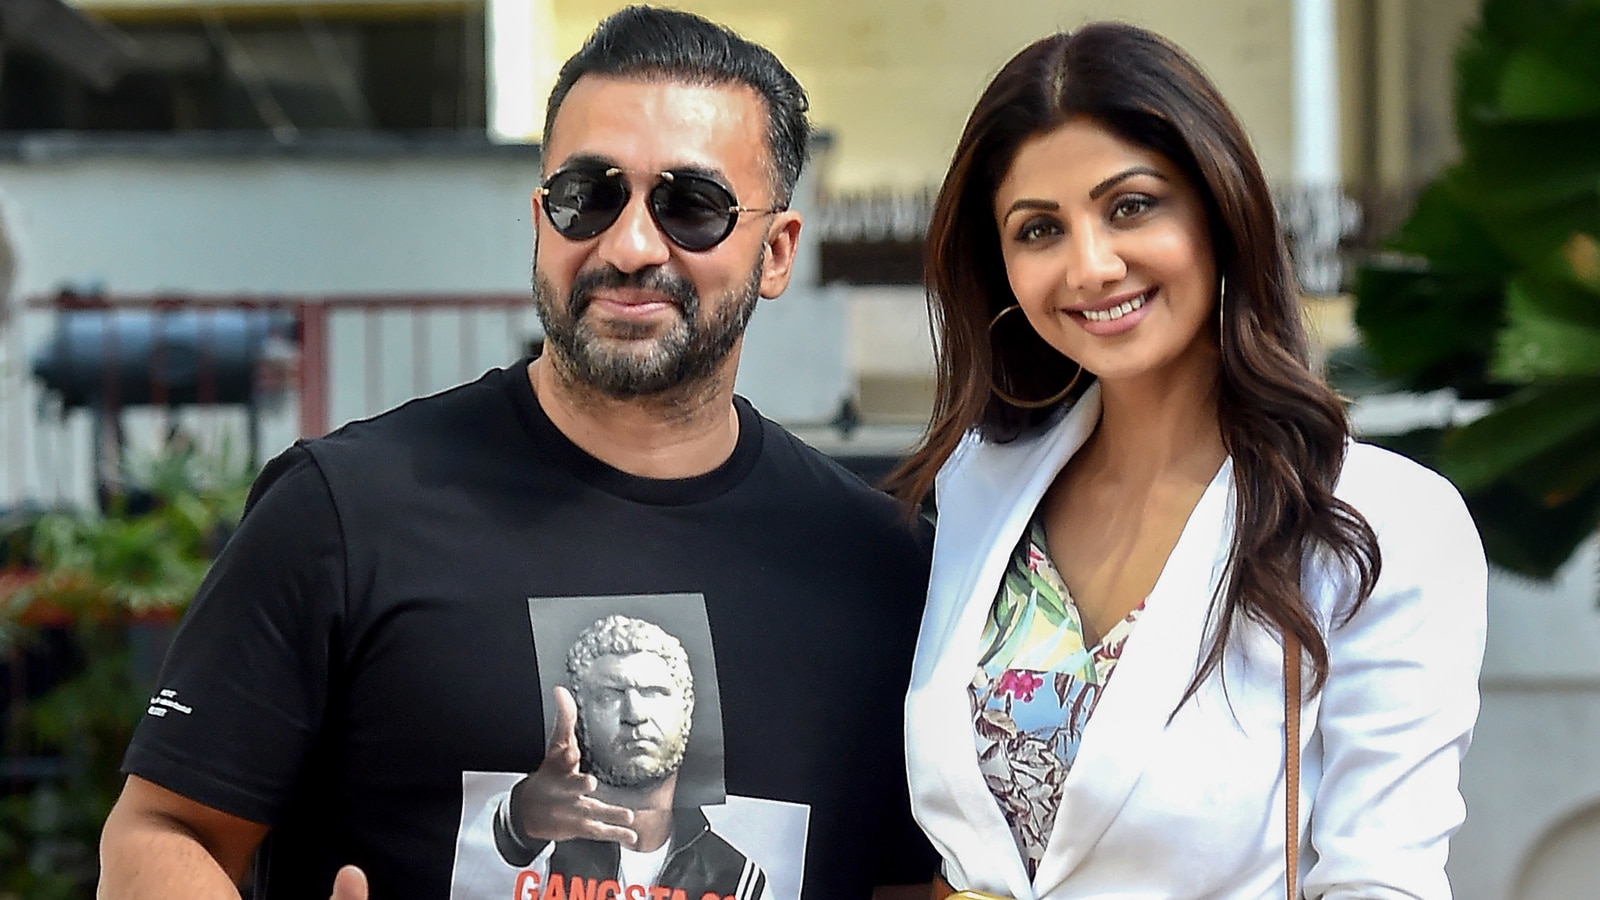 Xxx Video Shilpa Hindi - Actor Shilpa Shetty's husband Raj Kundra arrested for making porn: What we  know so far | Latest News India - Hindustan Times